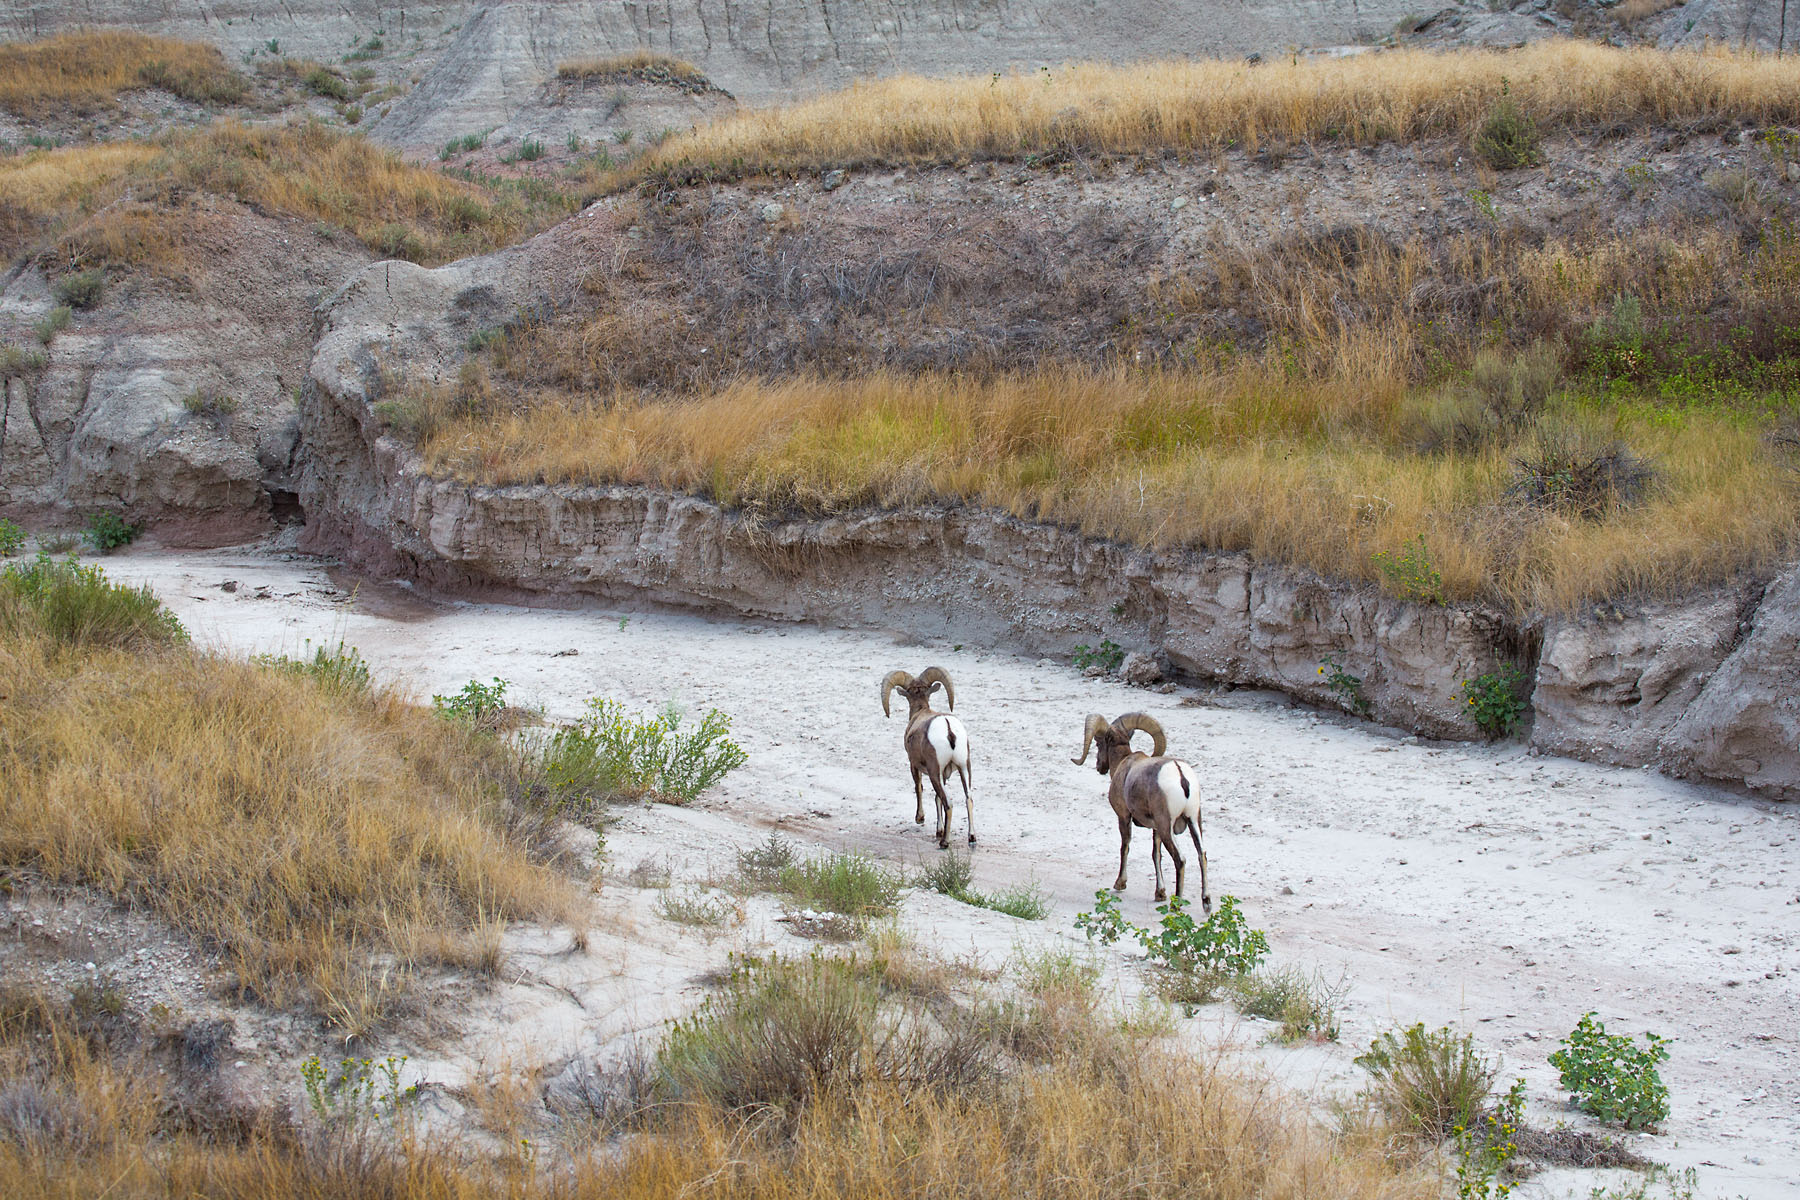 Bighorns in a dry creek bed, Badlands National Park, summer 2020.  Click for next photo.